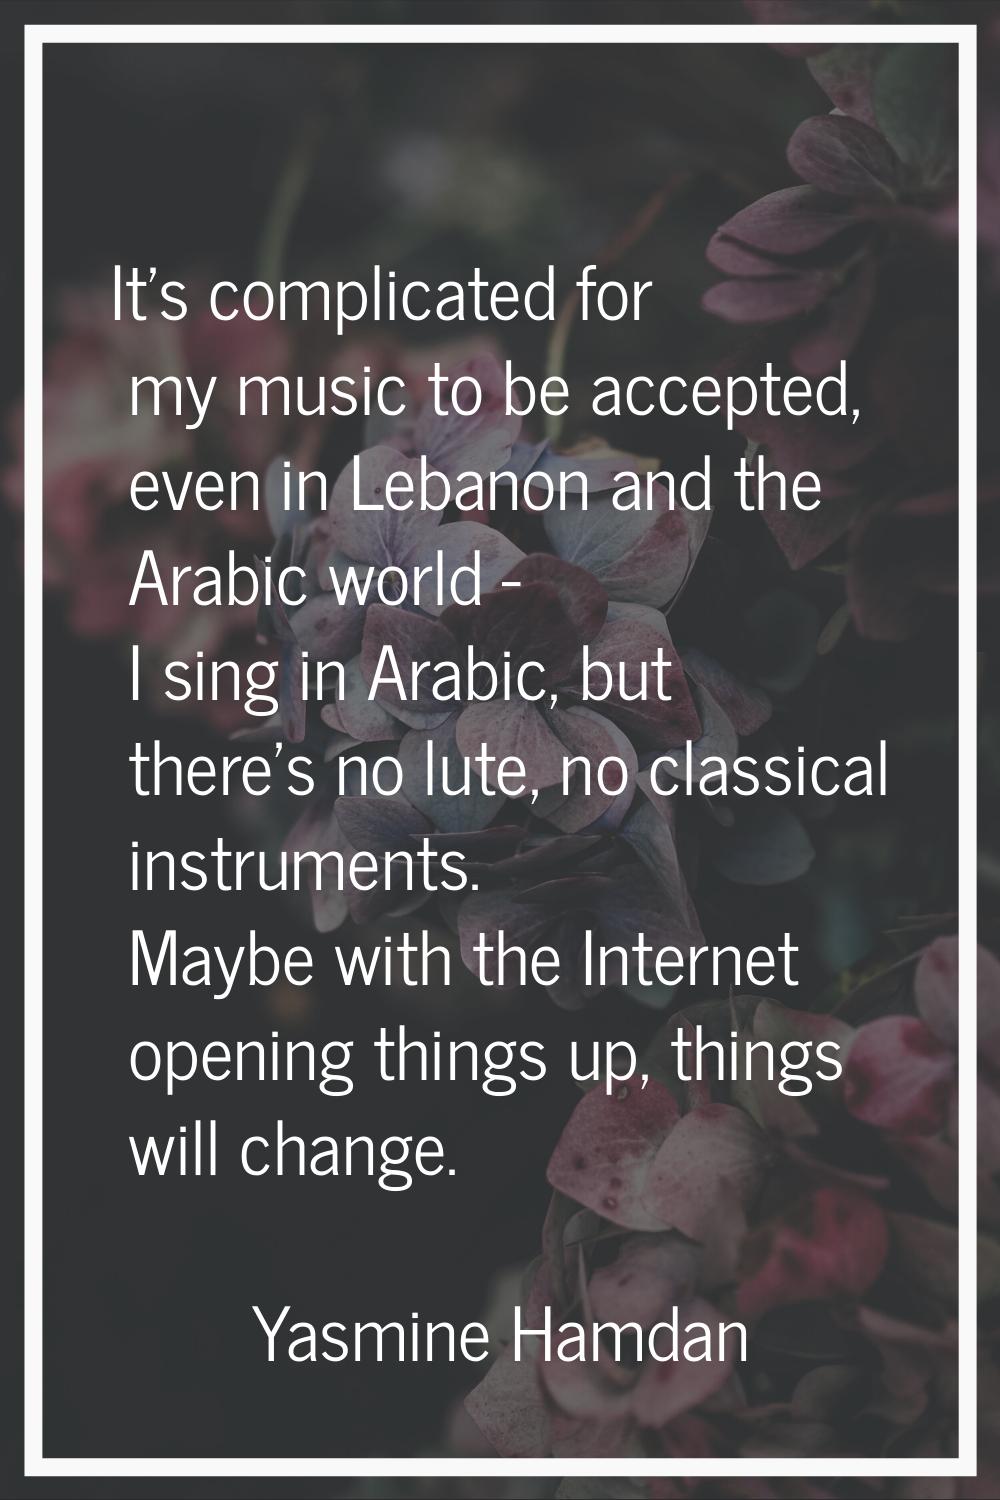 It's complicated for my music to be accepted, even in Lebanon and the Arabic world - I sing in Arab